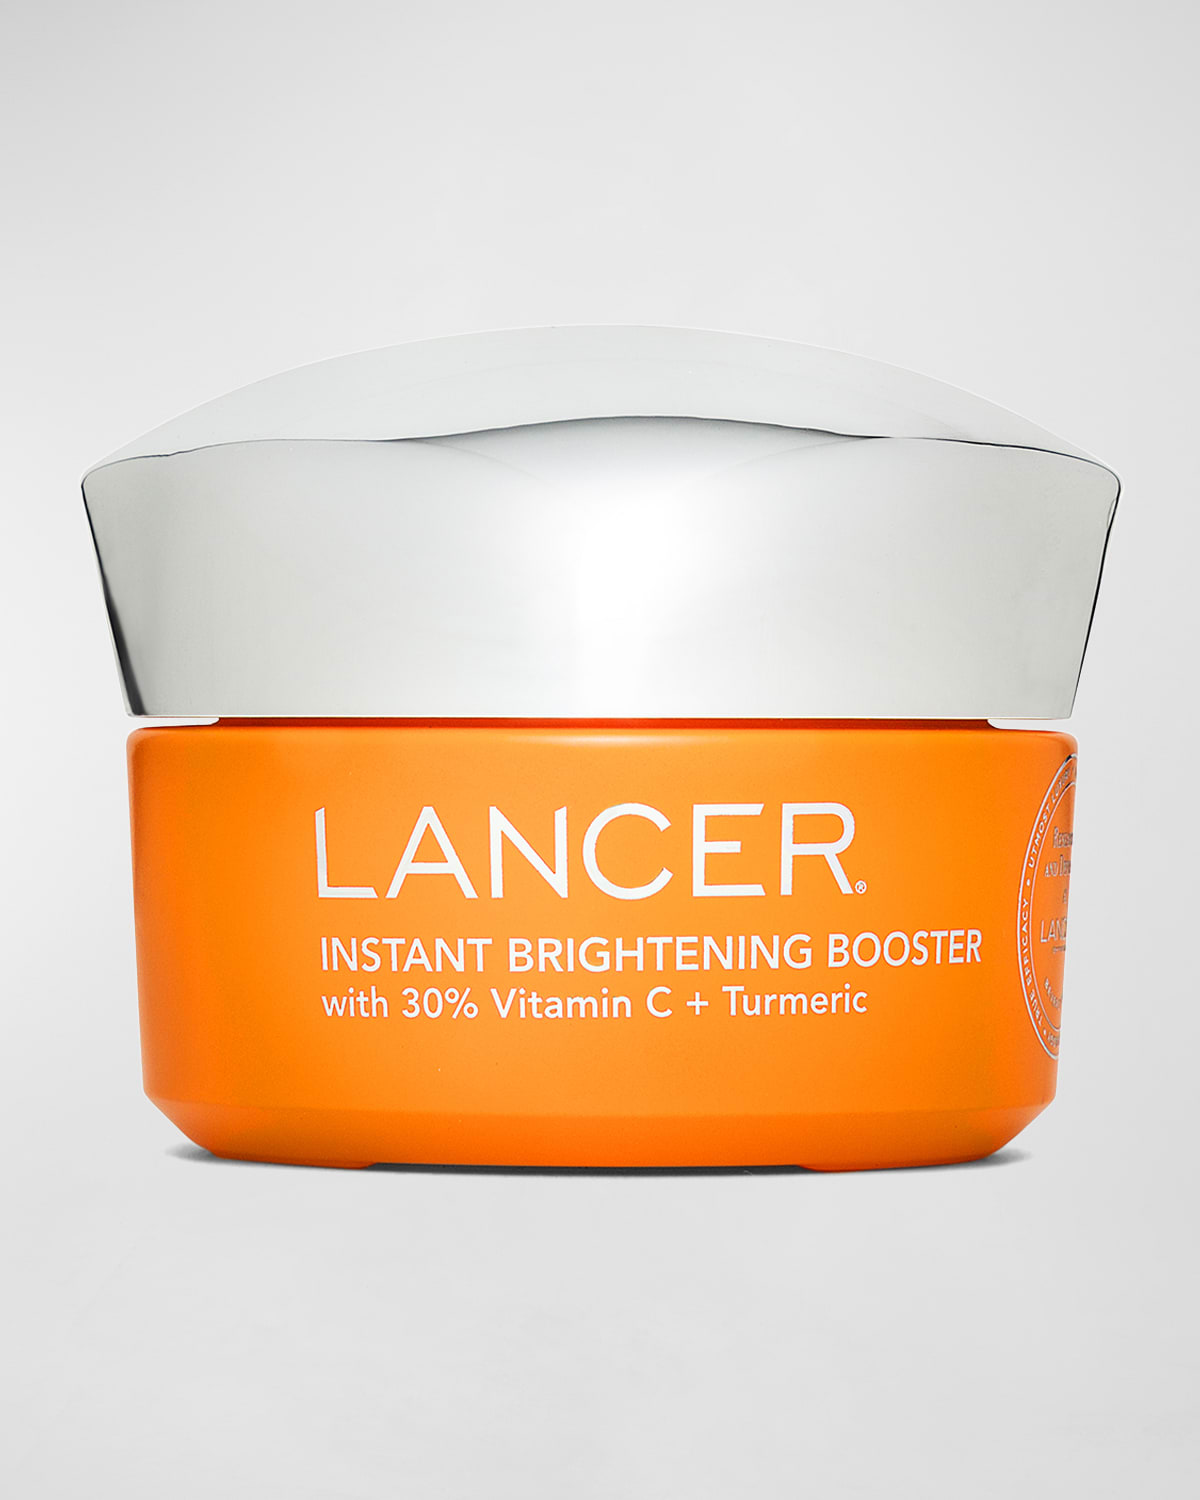 Lancer Instant Brightening Booster with 30% Vitamin C + Turmeric, 1.7 oz.